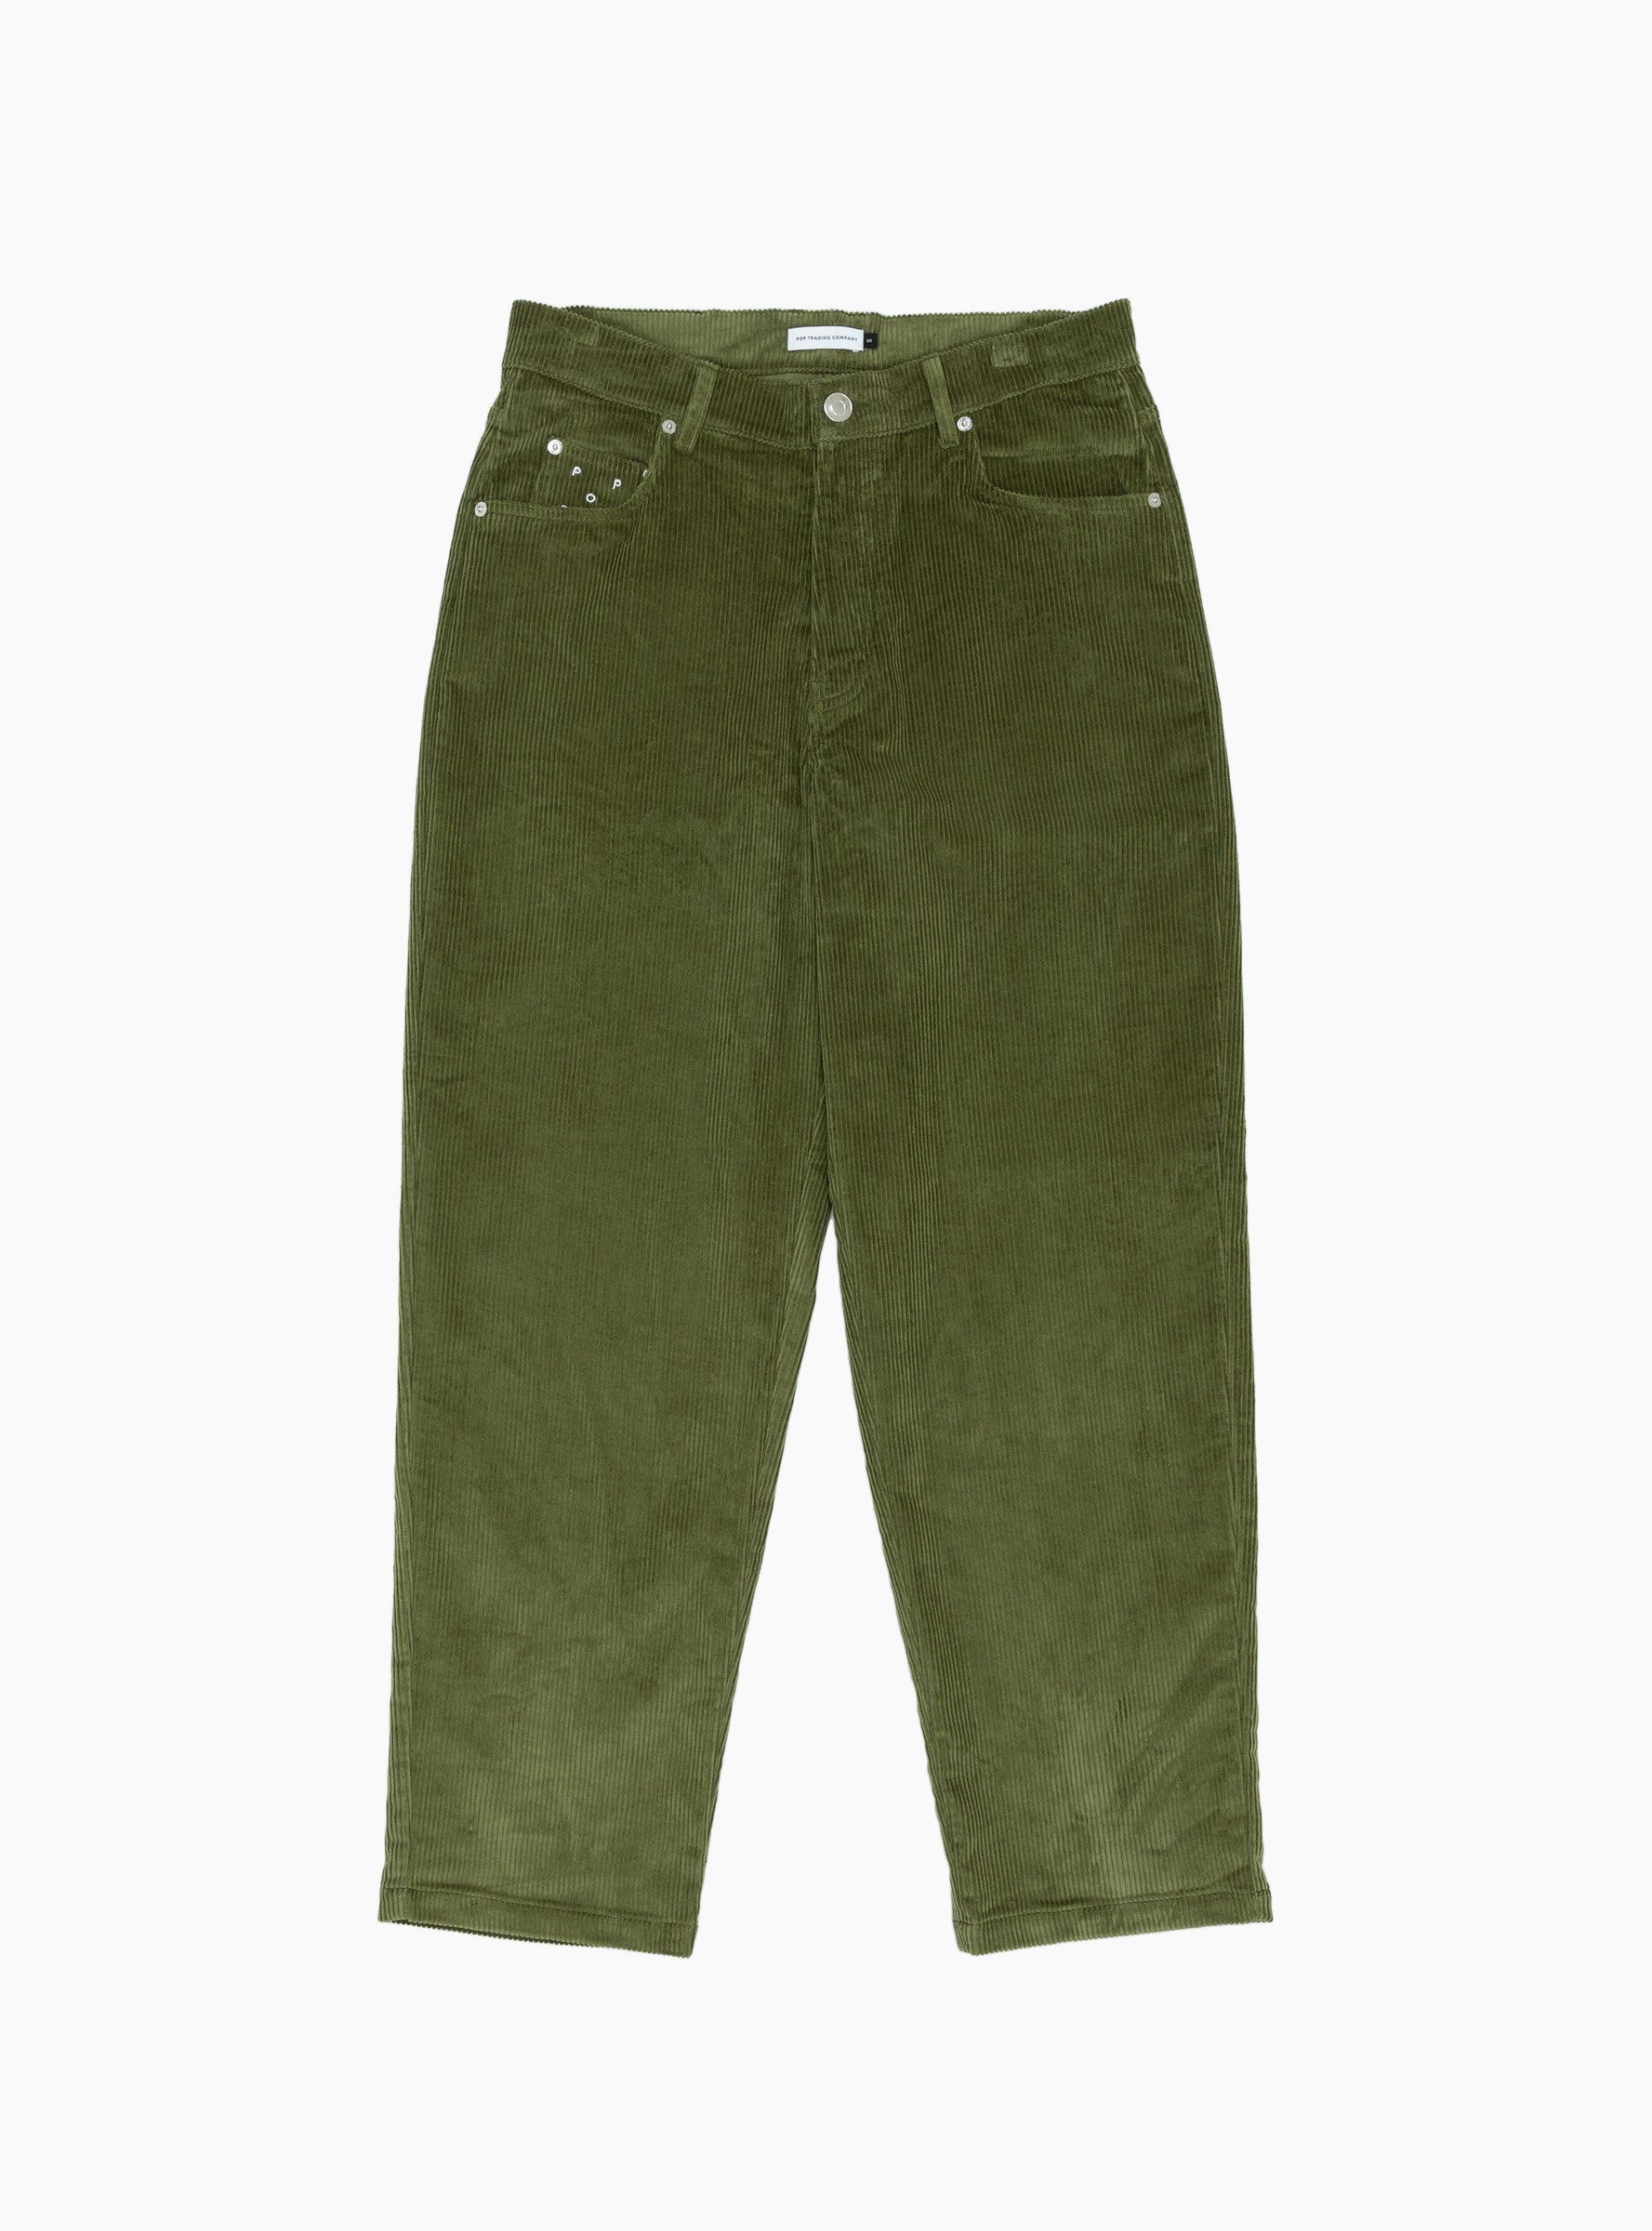 Pop Trading Company Pop Trading Company DRS Pant Loden Green - Size: Small